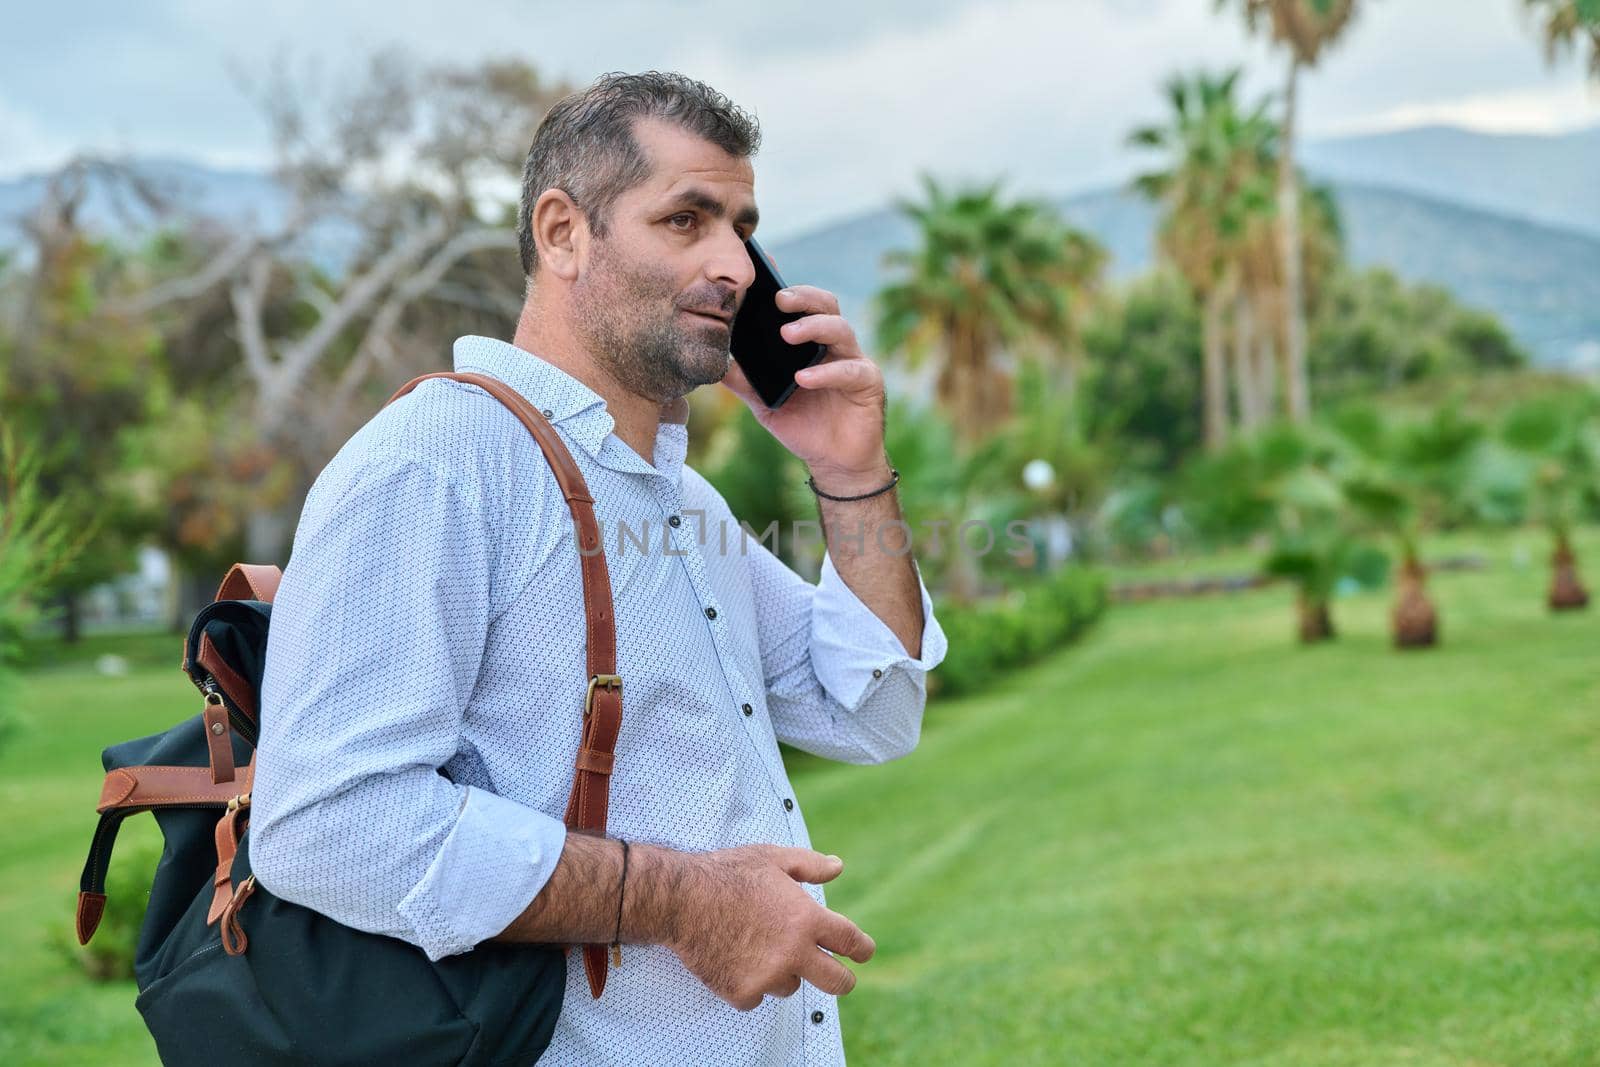 Mature business man talking on the phone outdoors. Serious confident male with backpack, in tropical park. Business trip, freelance, communication, technology, middle aged people concept, copy space